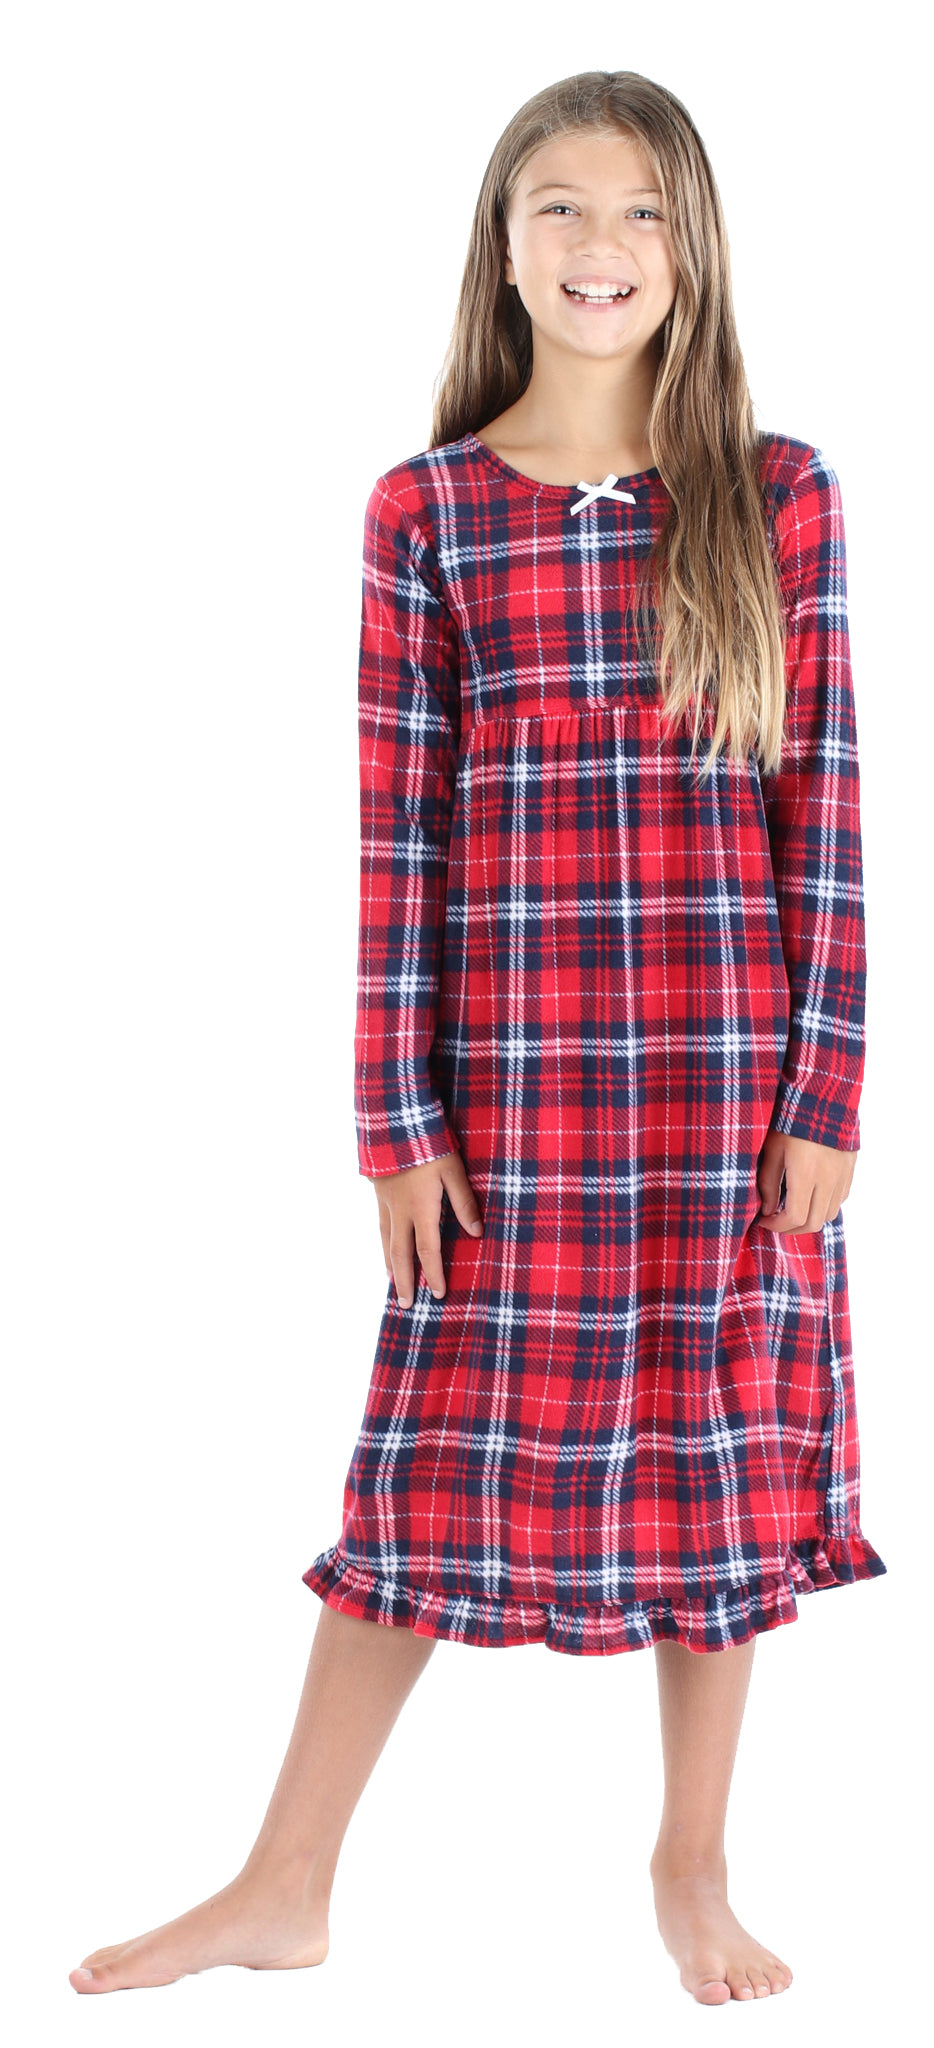 A person wearing matching pajamas. The background is solid white and you can see their full body. Fabric is Fleece and the print is Red Blue Plaid